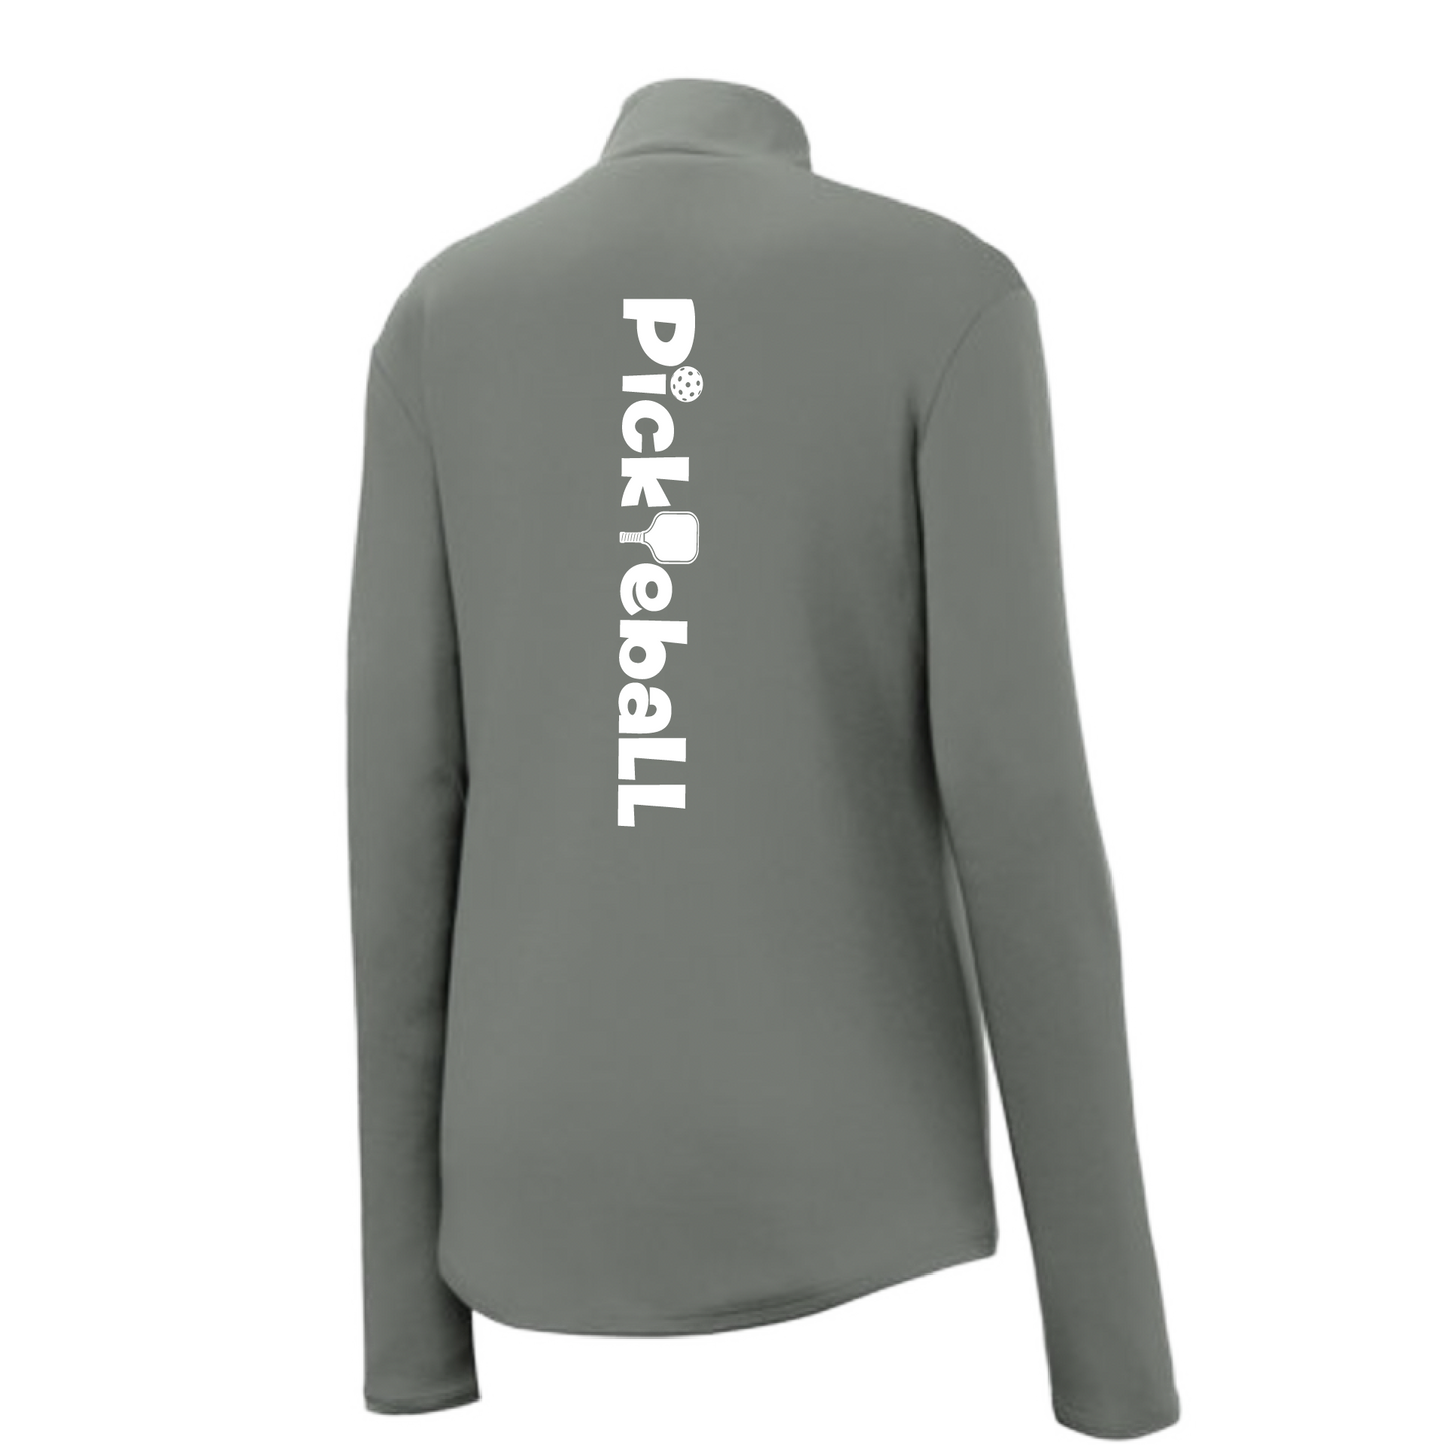 Pickleball Design: Pickleball Horizontal customizable location  Women's 1/4-Zip Pullover:  Princess seams and drop tail hem.  Turn up the volume in this Women's shirt with its perfect mix of softness and attitude. Material is ultra-comfortable with moisture wicking properties and tri-blend softness. PosiCharge technology locks in color. Highly breathable and lightweight. Versatile enough for wearing year-round.